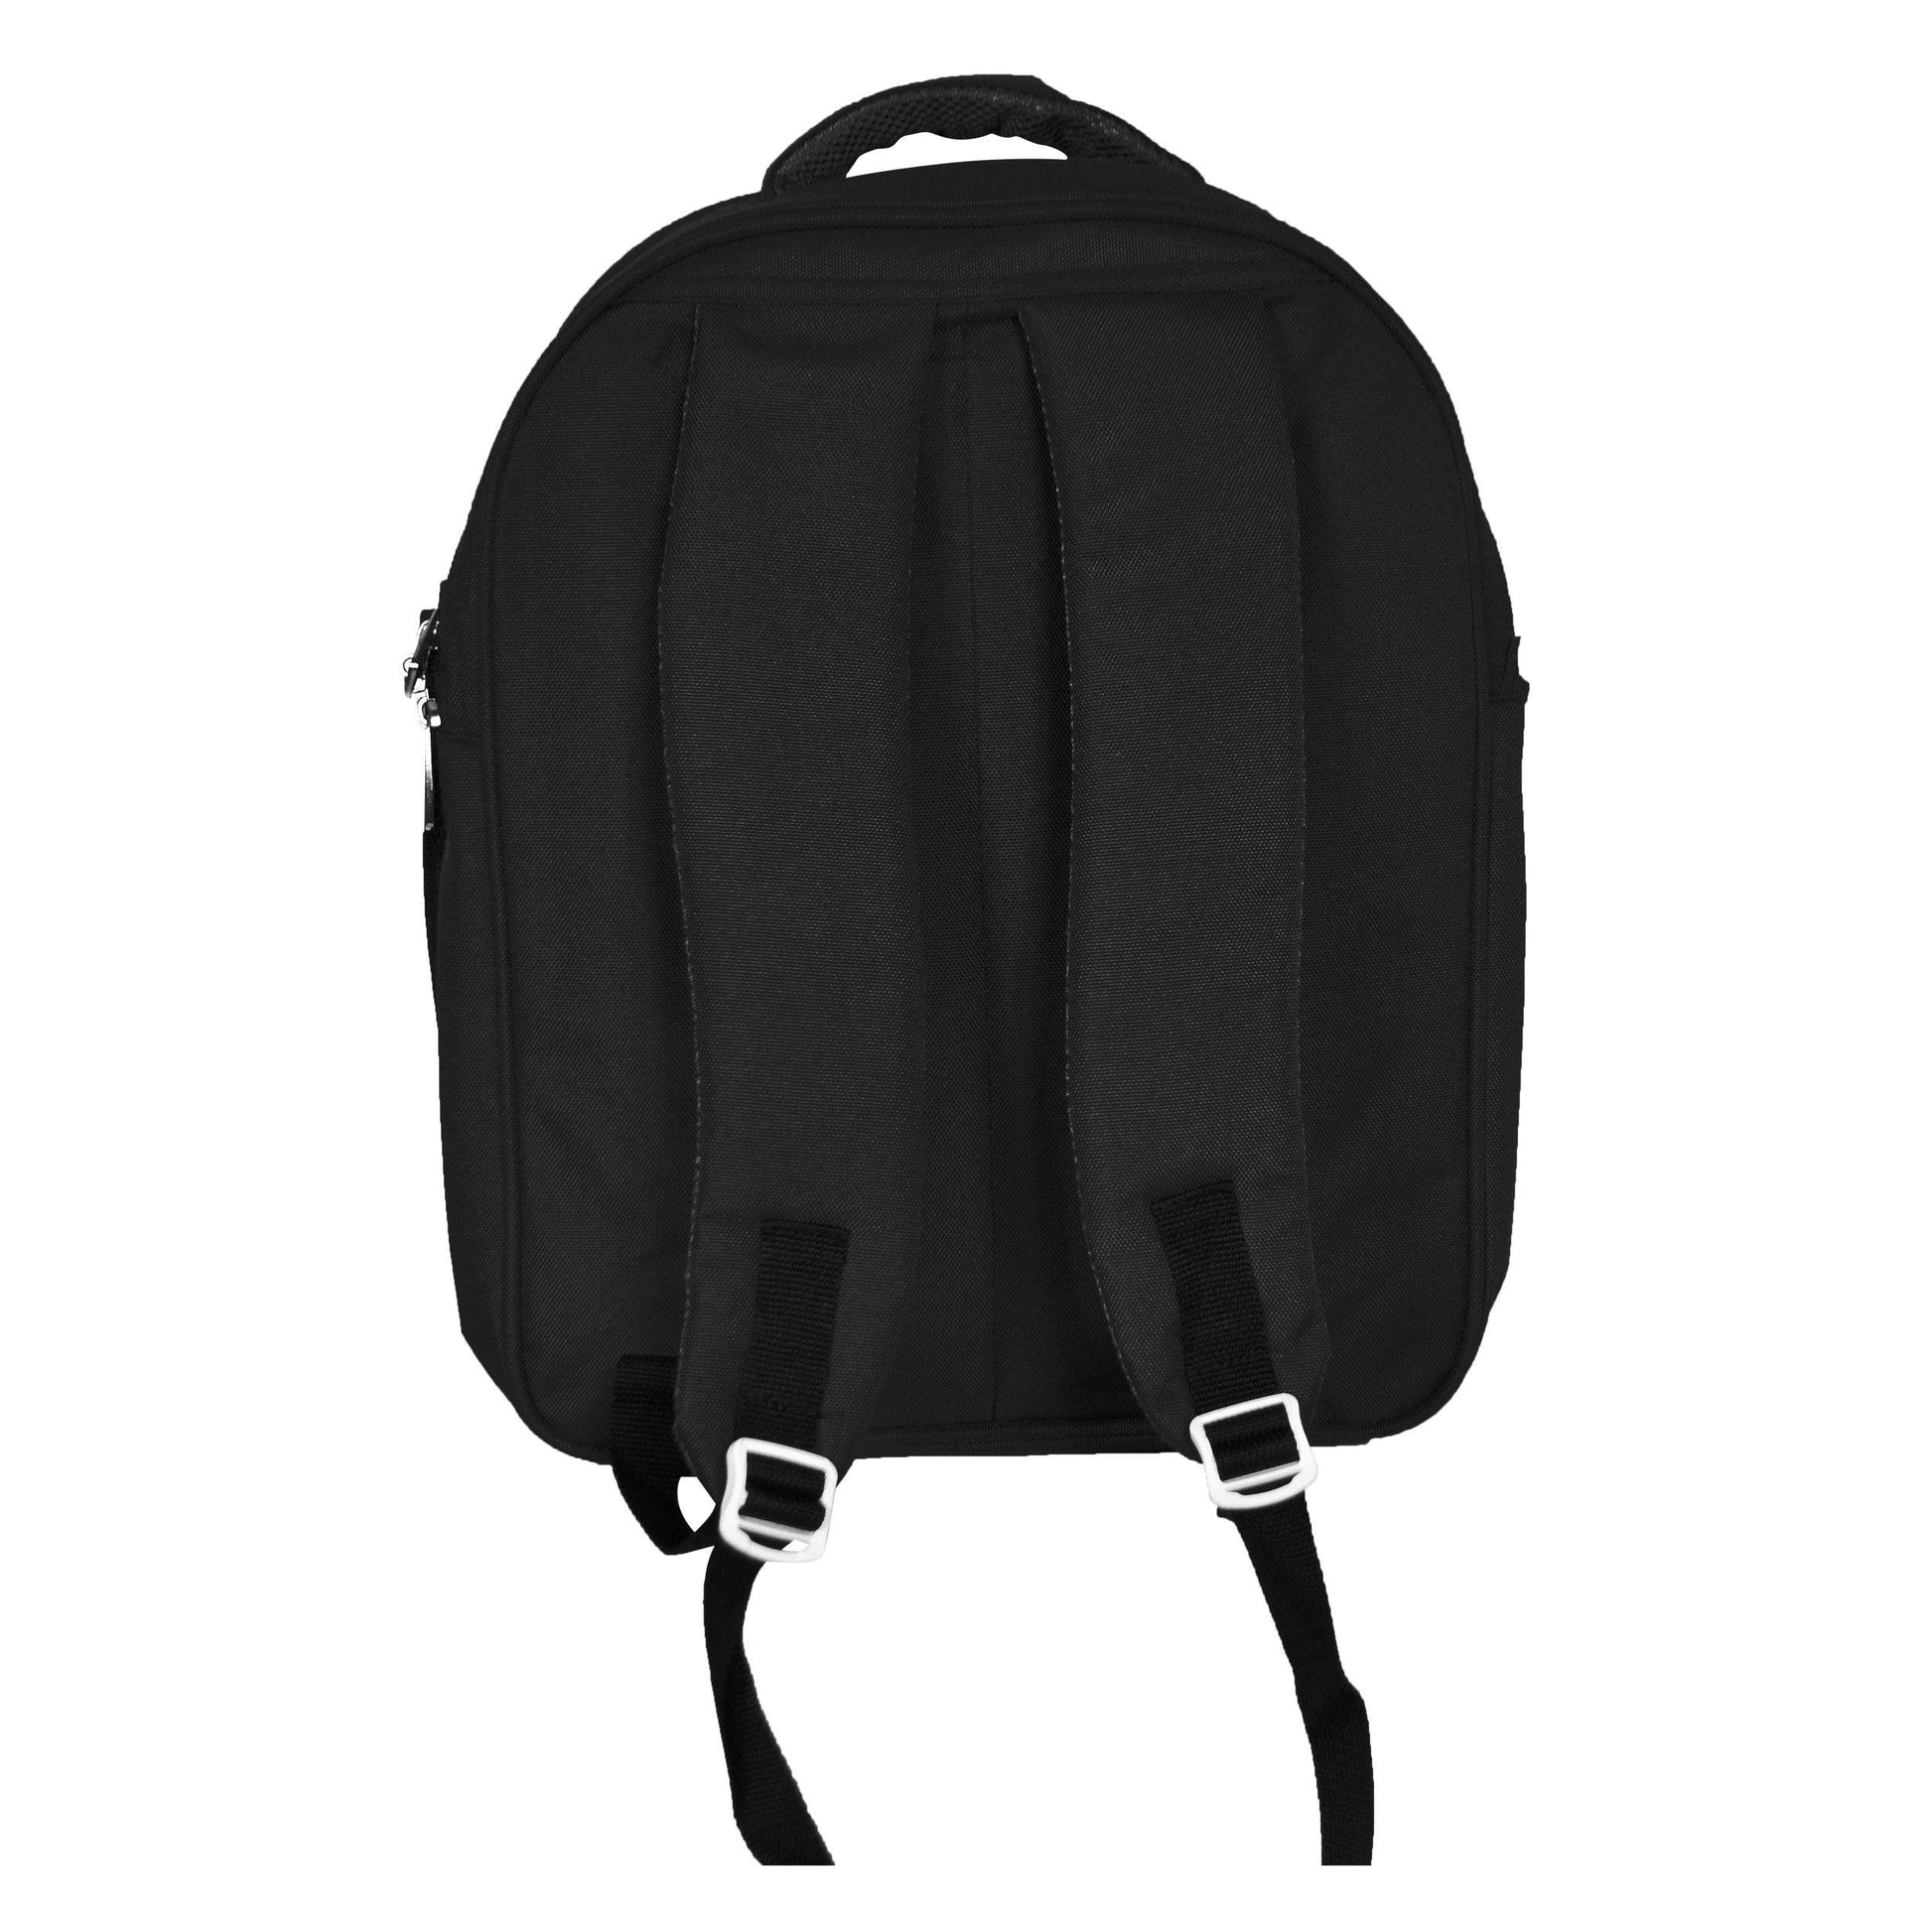 Dhariwal 33L Water Resistant Dual Compartment Matty School Bag SCB-301 Class 4 to 12 School Bags Dhariwal 